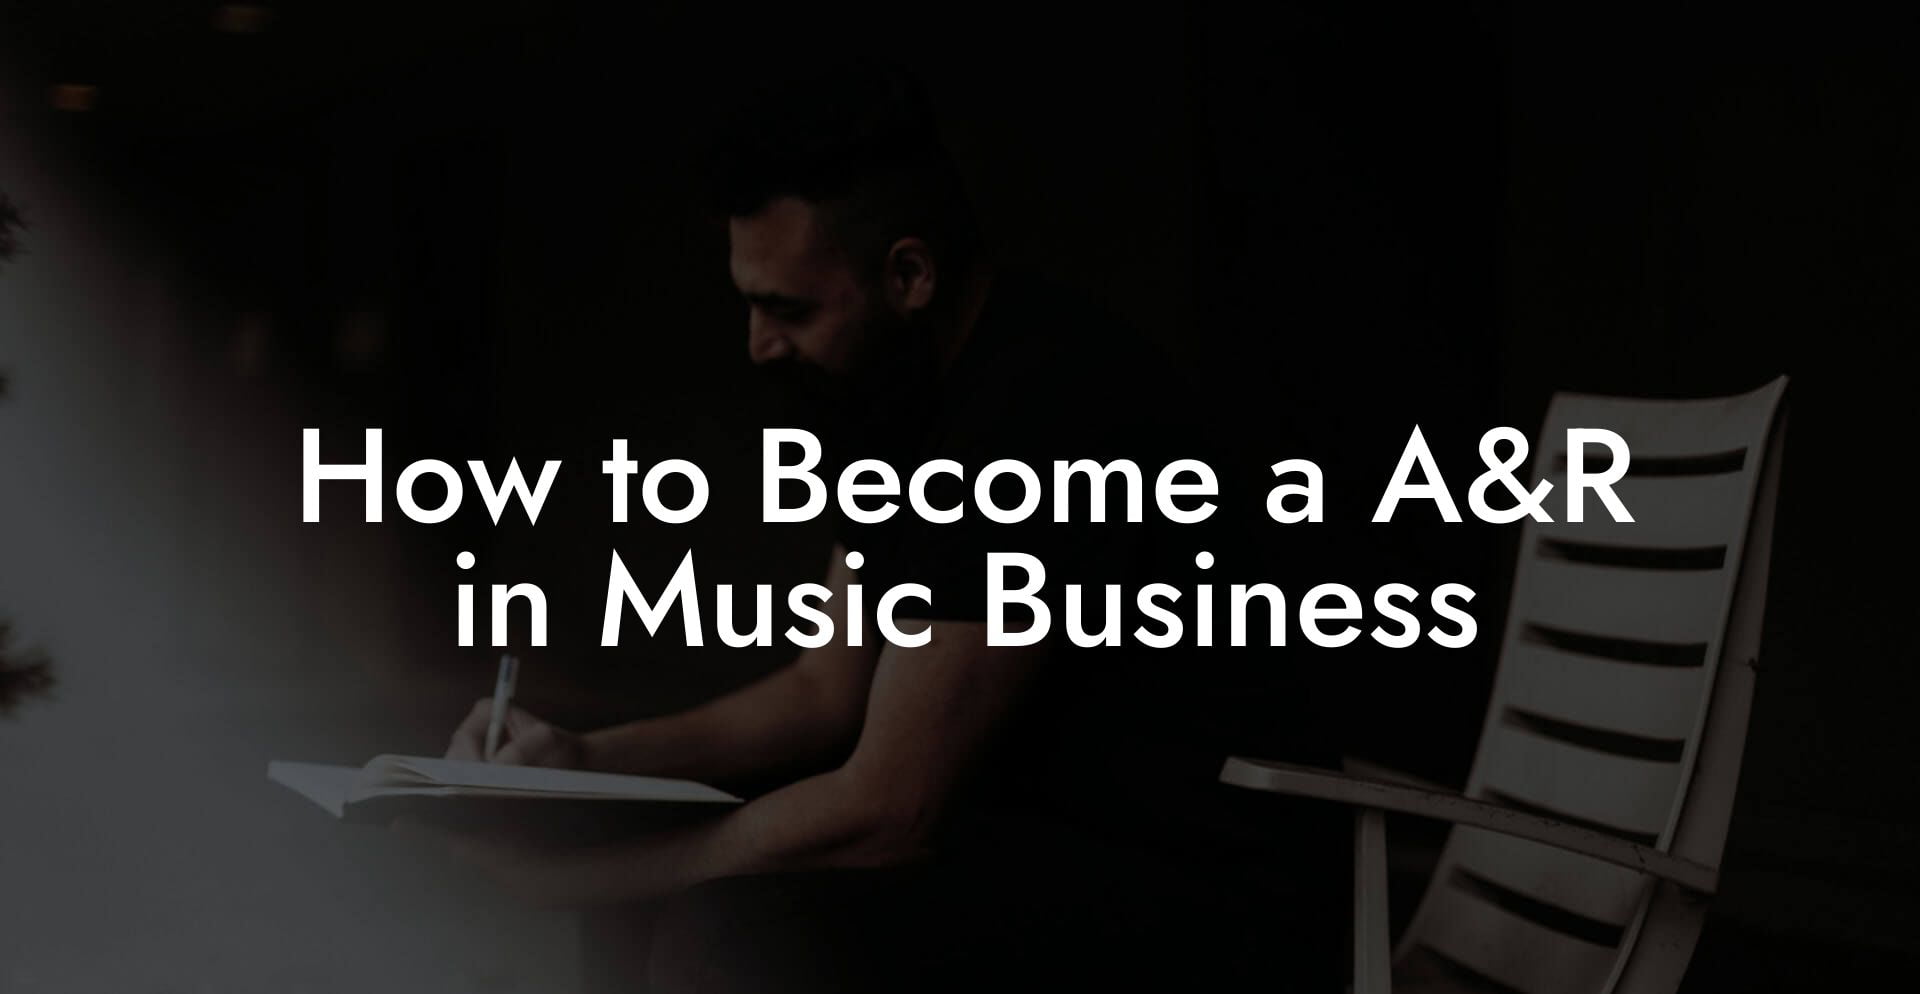 How to Become a A&R in Music Business